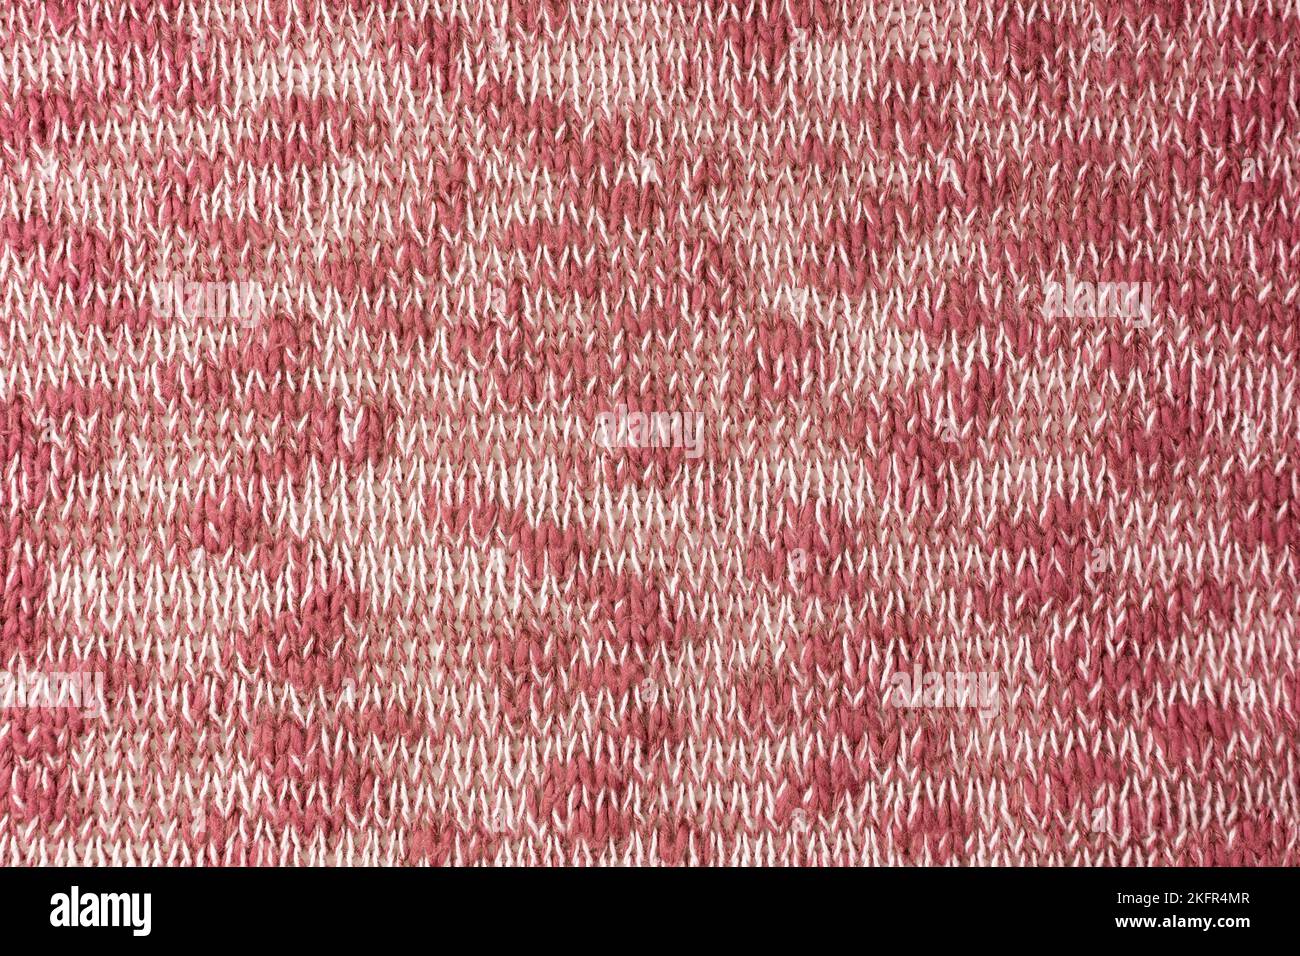 Close up background of knitted wool fabric made of viscose yarn. Mix of red and white color, melange wool knitwear texture. Abstract knitted jersey ba Stock Photo